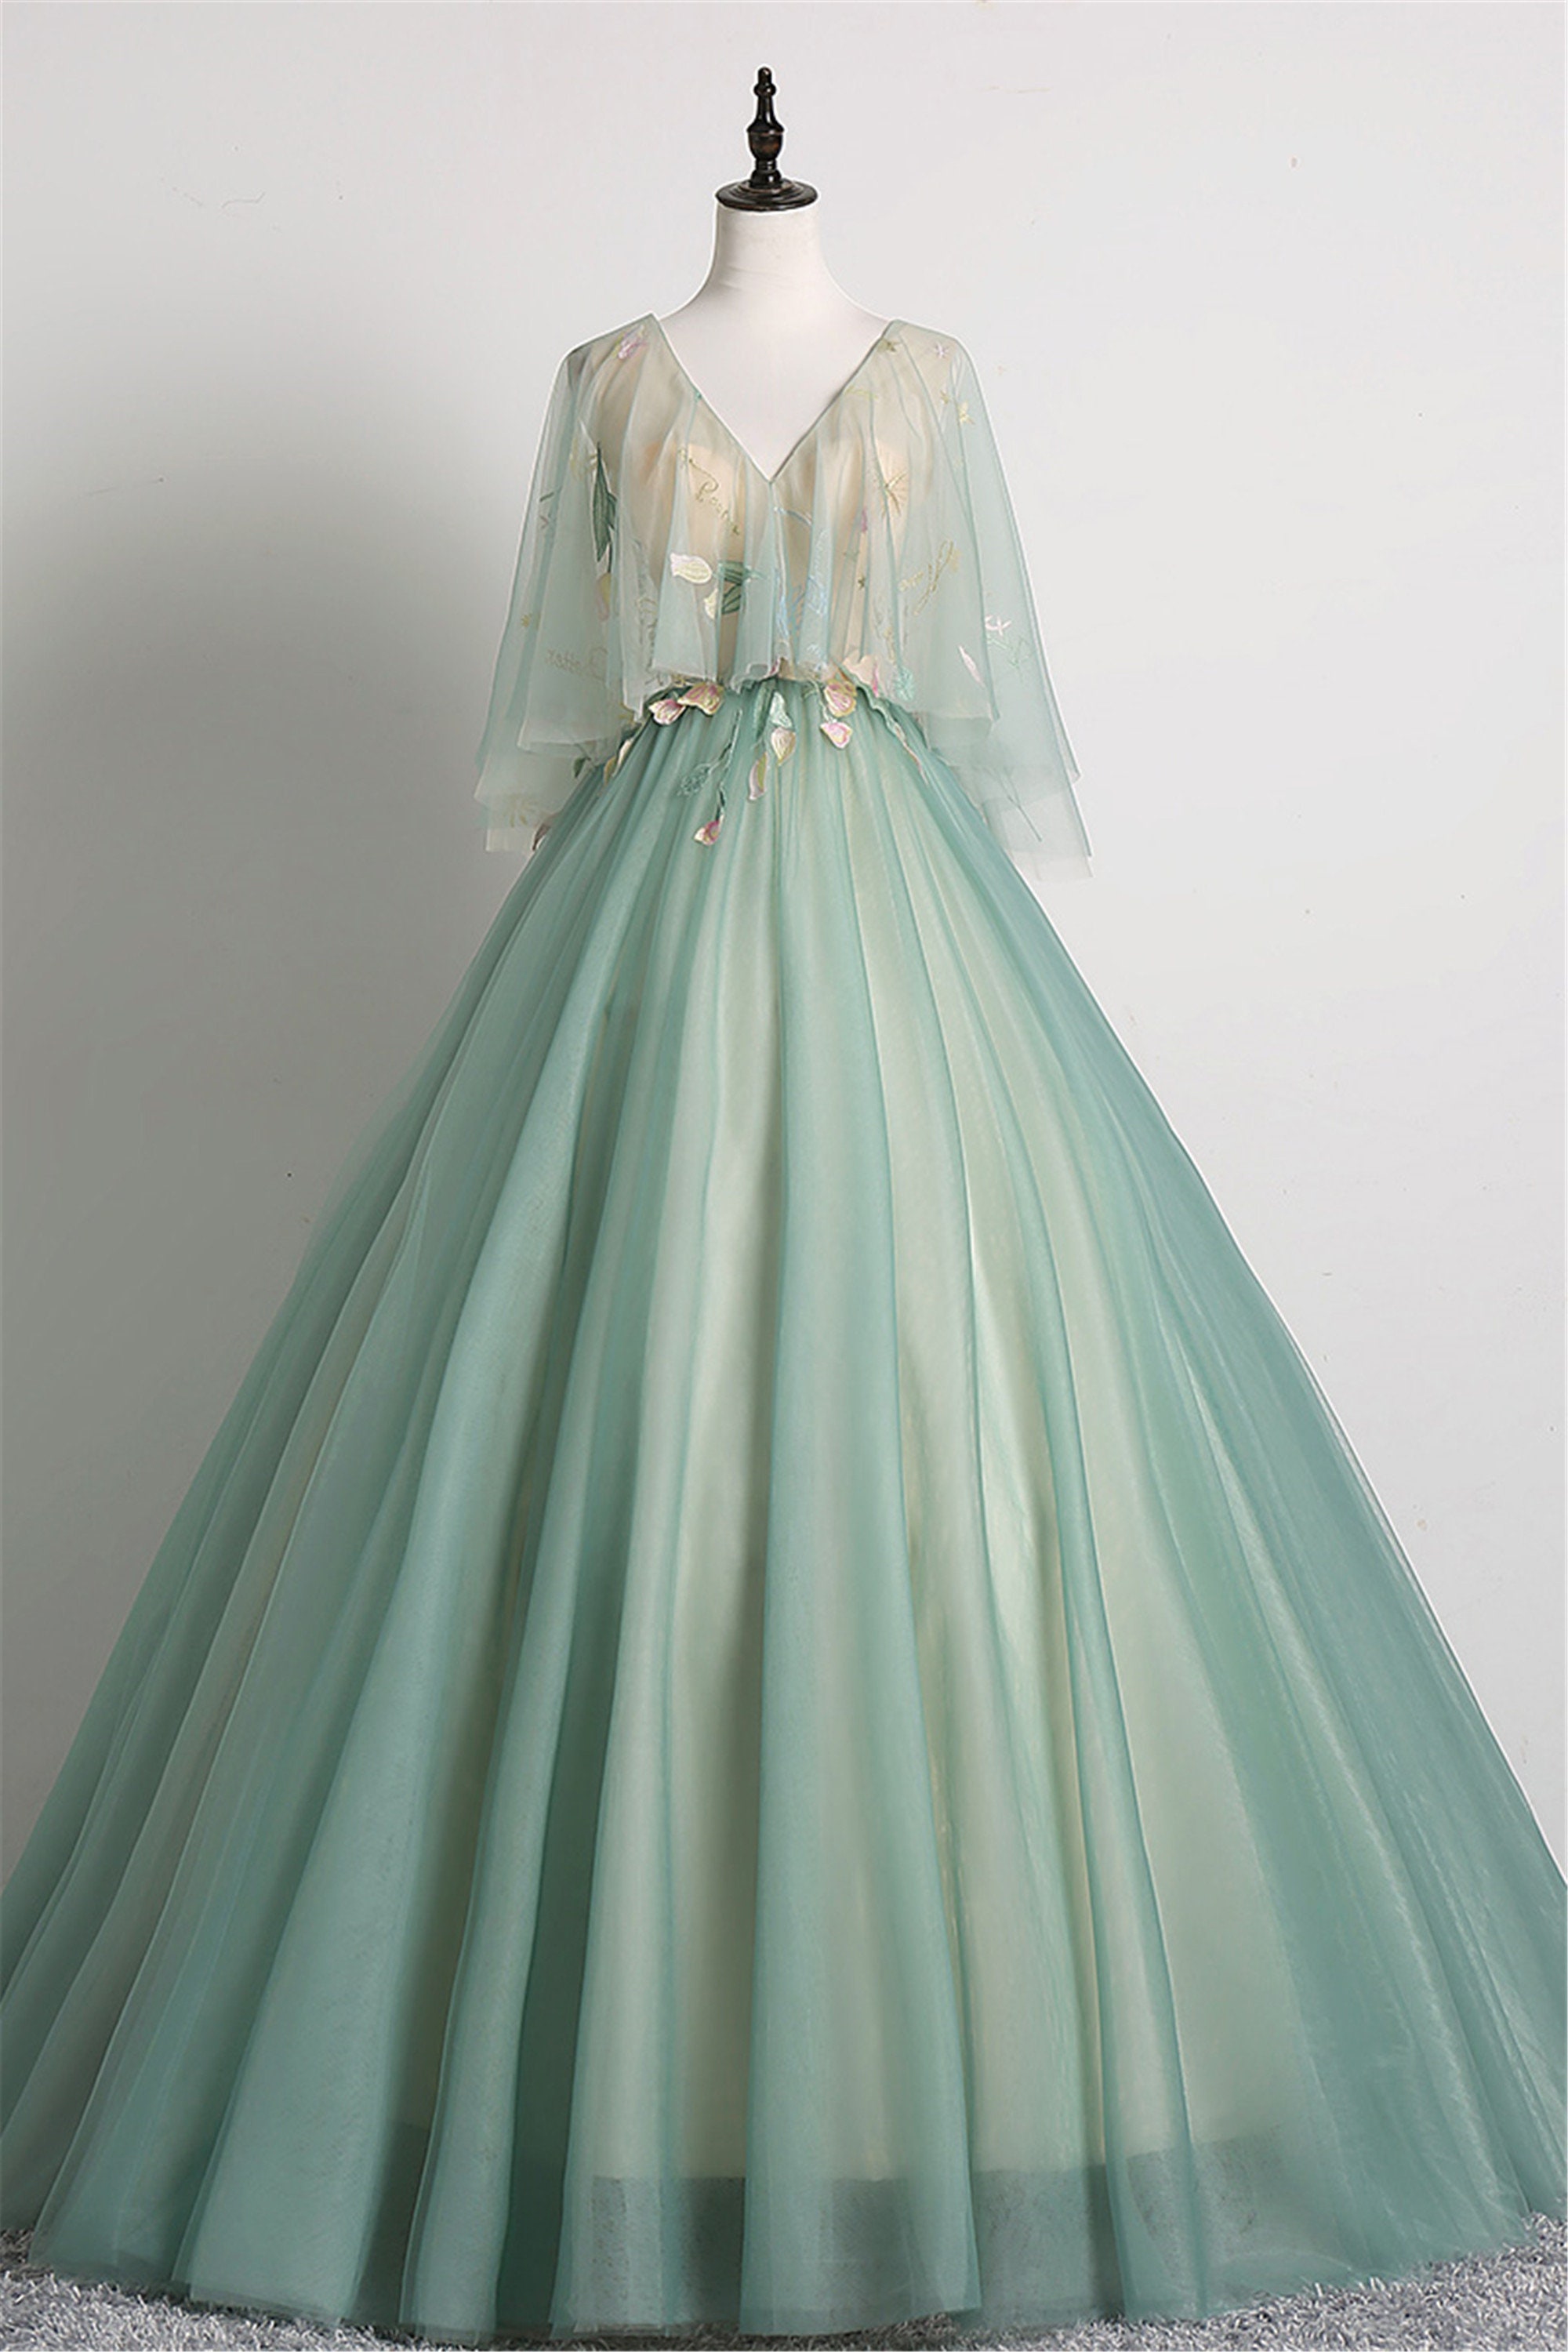 Green prom dress with sleeves-Sex photo